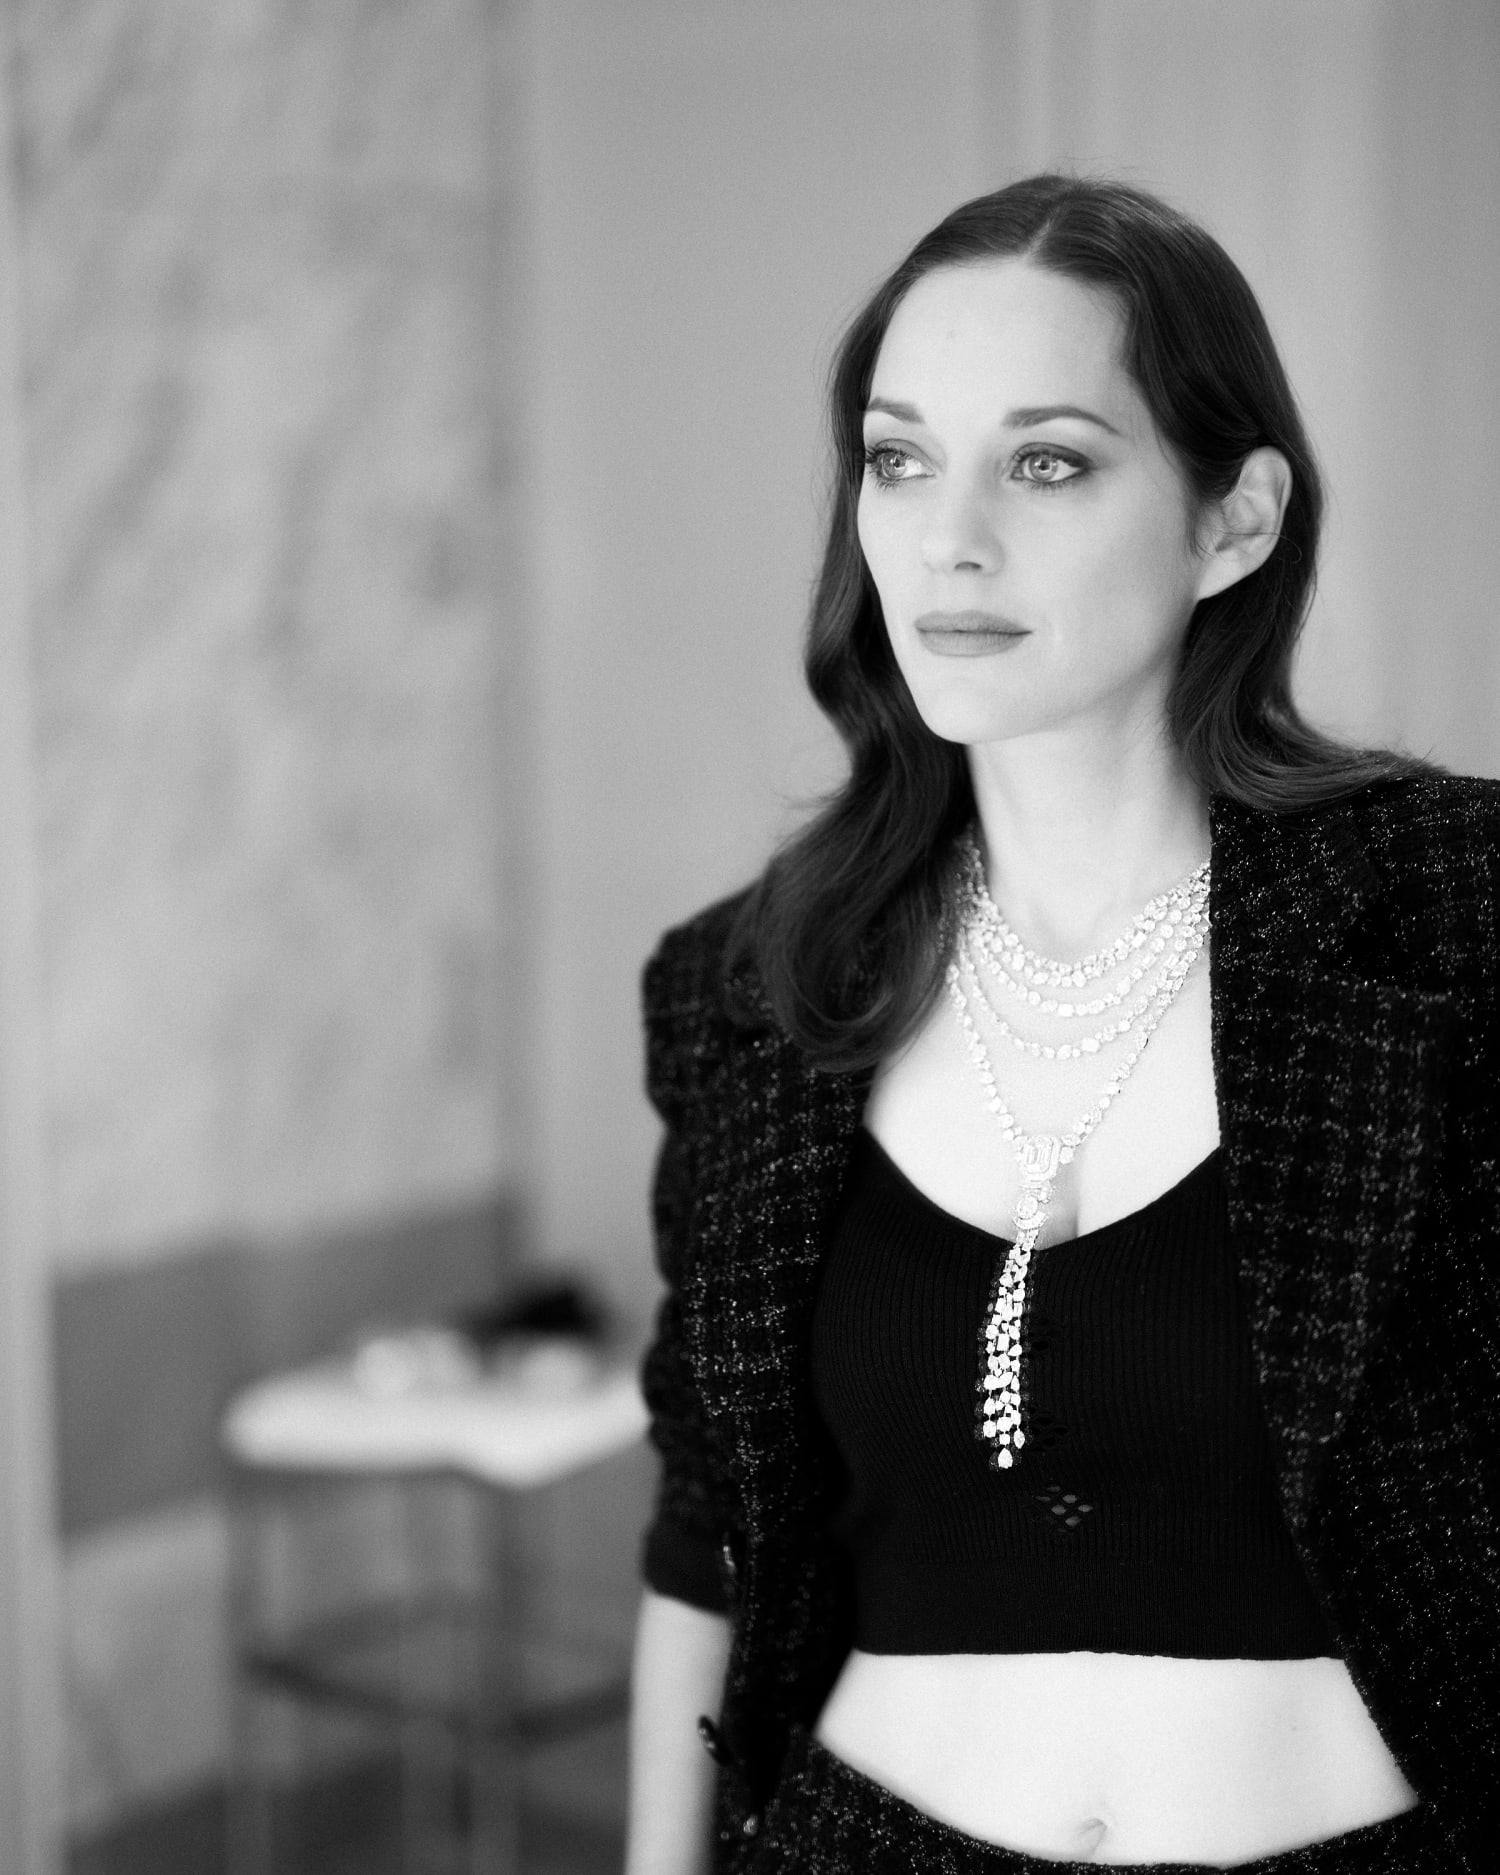 Marion Cotillard in CHANEL for the launch of the High Jewelry Collection N °5